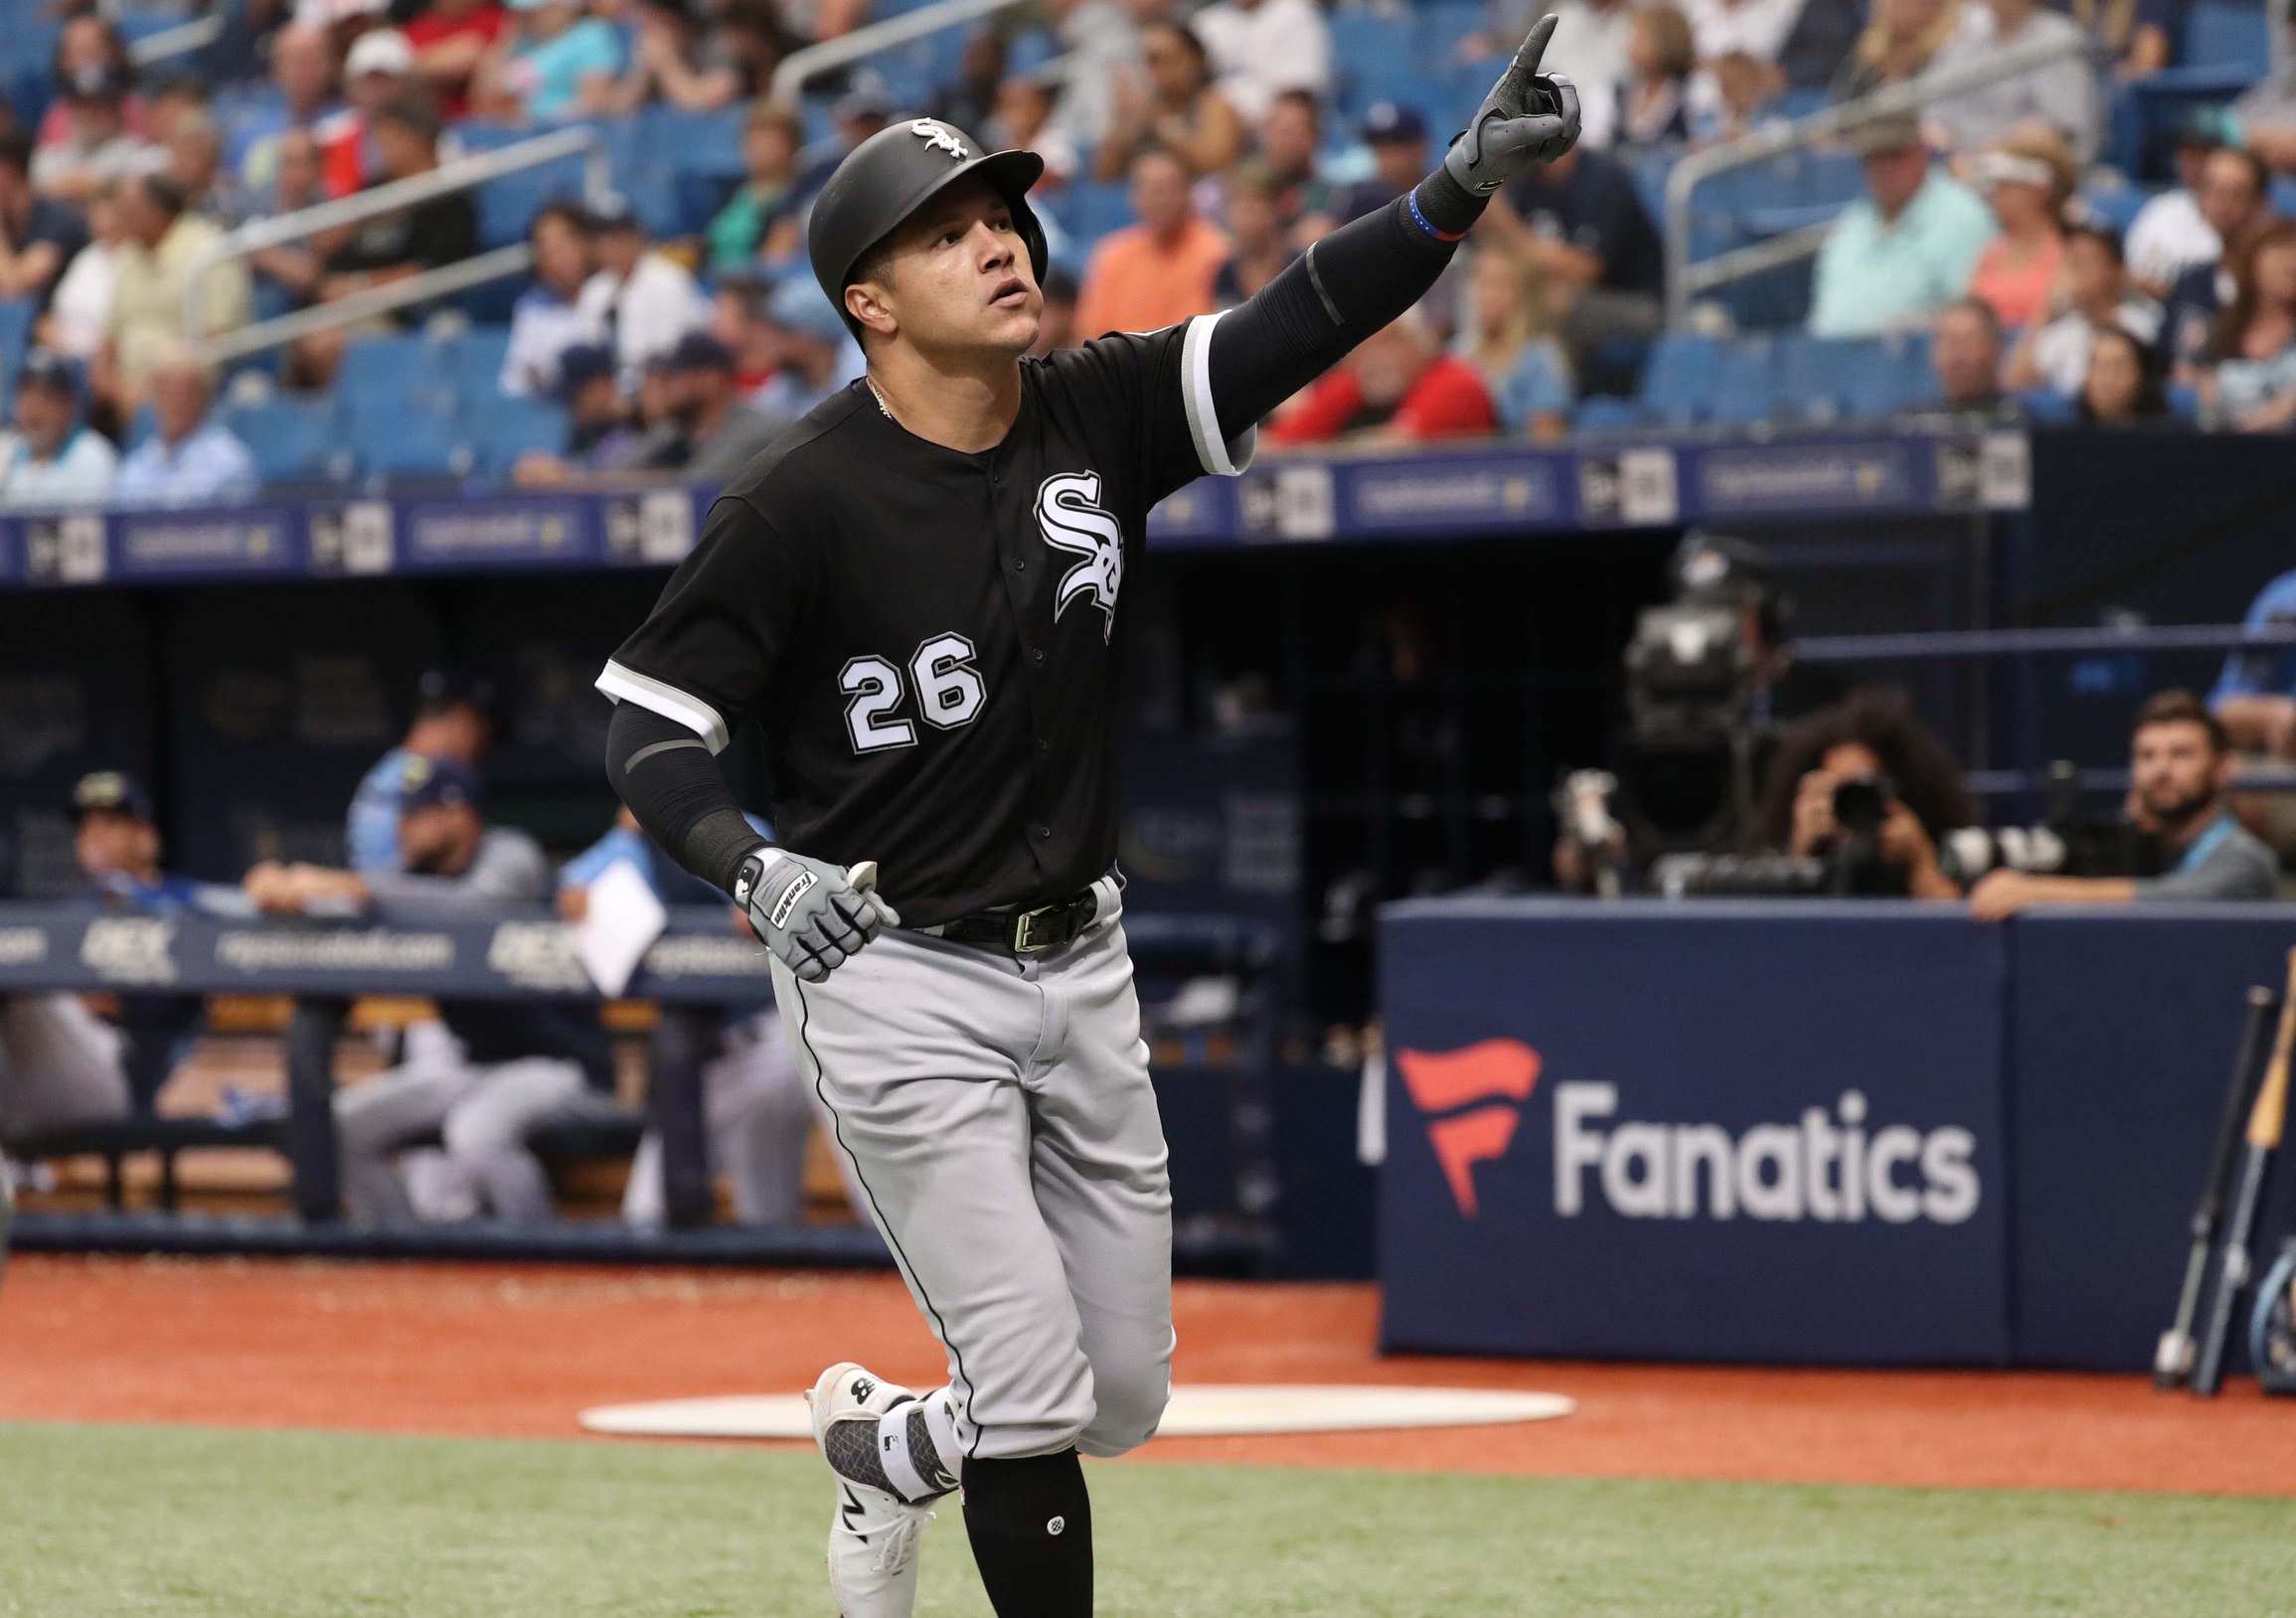 Aug 5, 2018; St. Petersburg, FL, USA; Chicago White Sox right fielder Avisail Garcia (26) points to celebrate as he hits a home run during the seventh inning against the Tampa Bay Rays at Tropicana Field. Mandatory Credit: Kim Klement-USA TODAY Sports